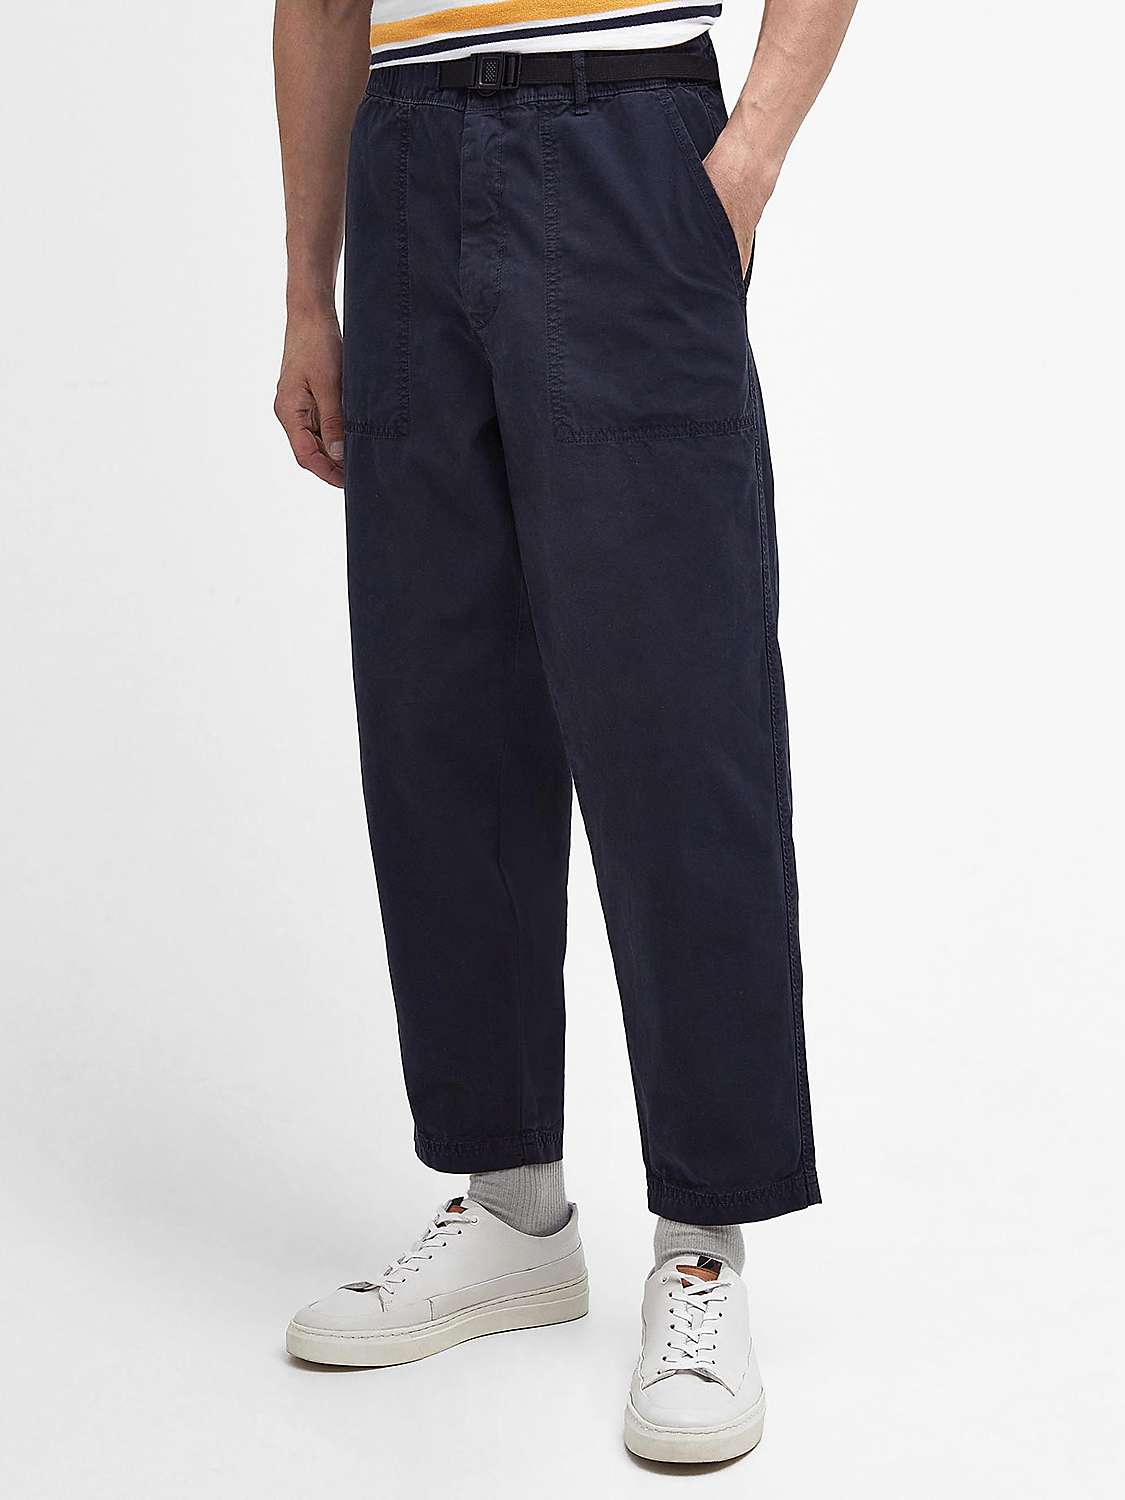 Buy Barbour Grindle Cotton Canvas Twill Straight Leg Trousers, Navy Online at johnlewis.com